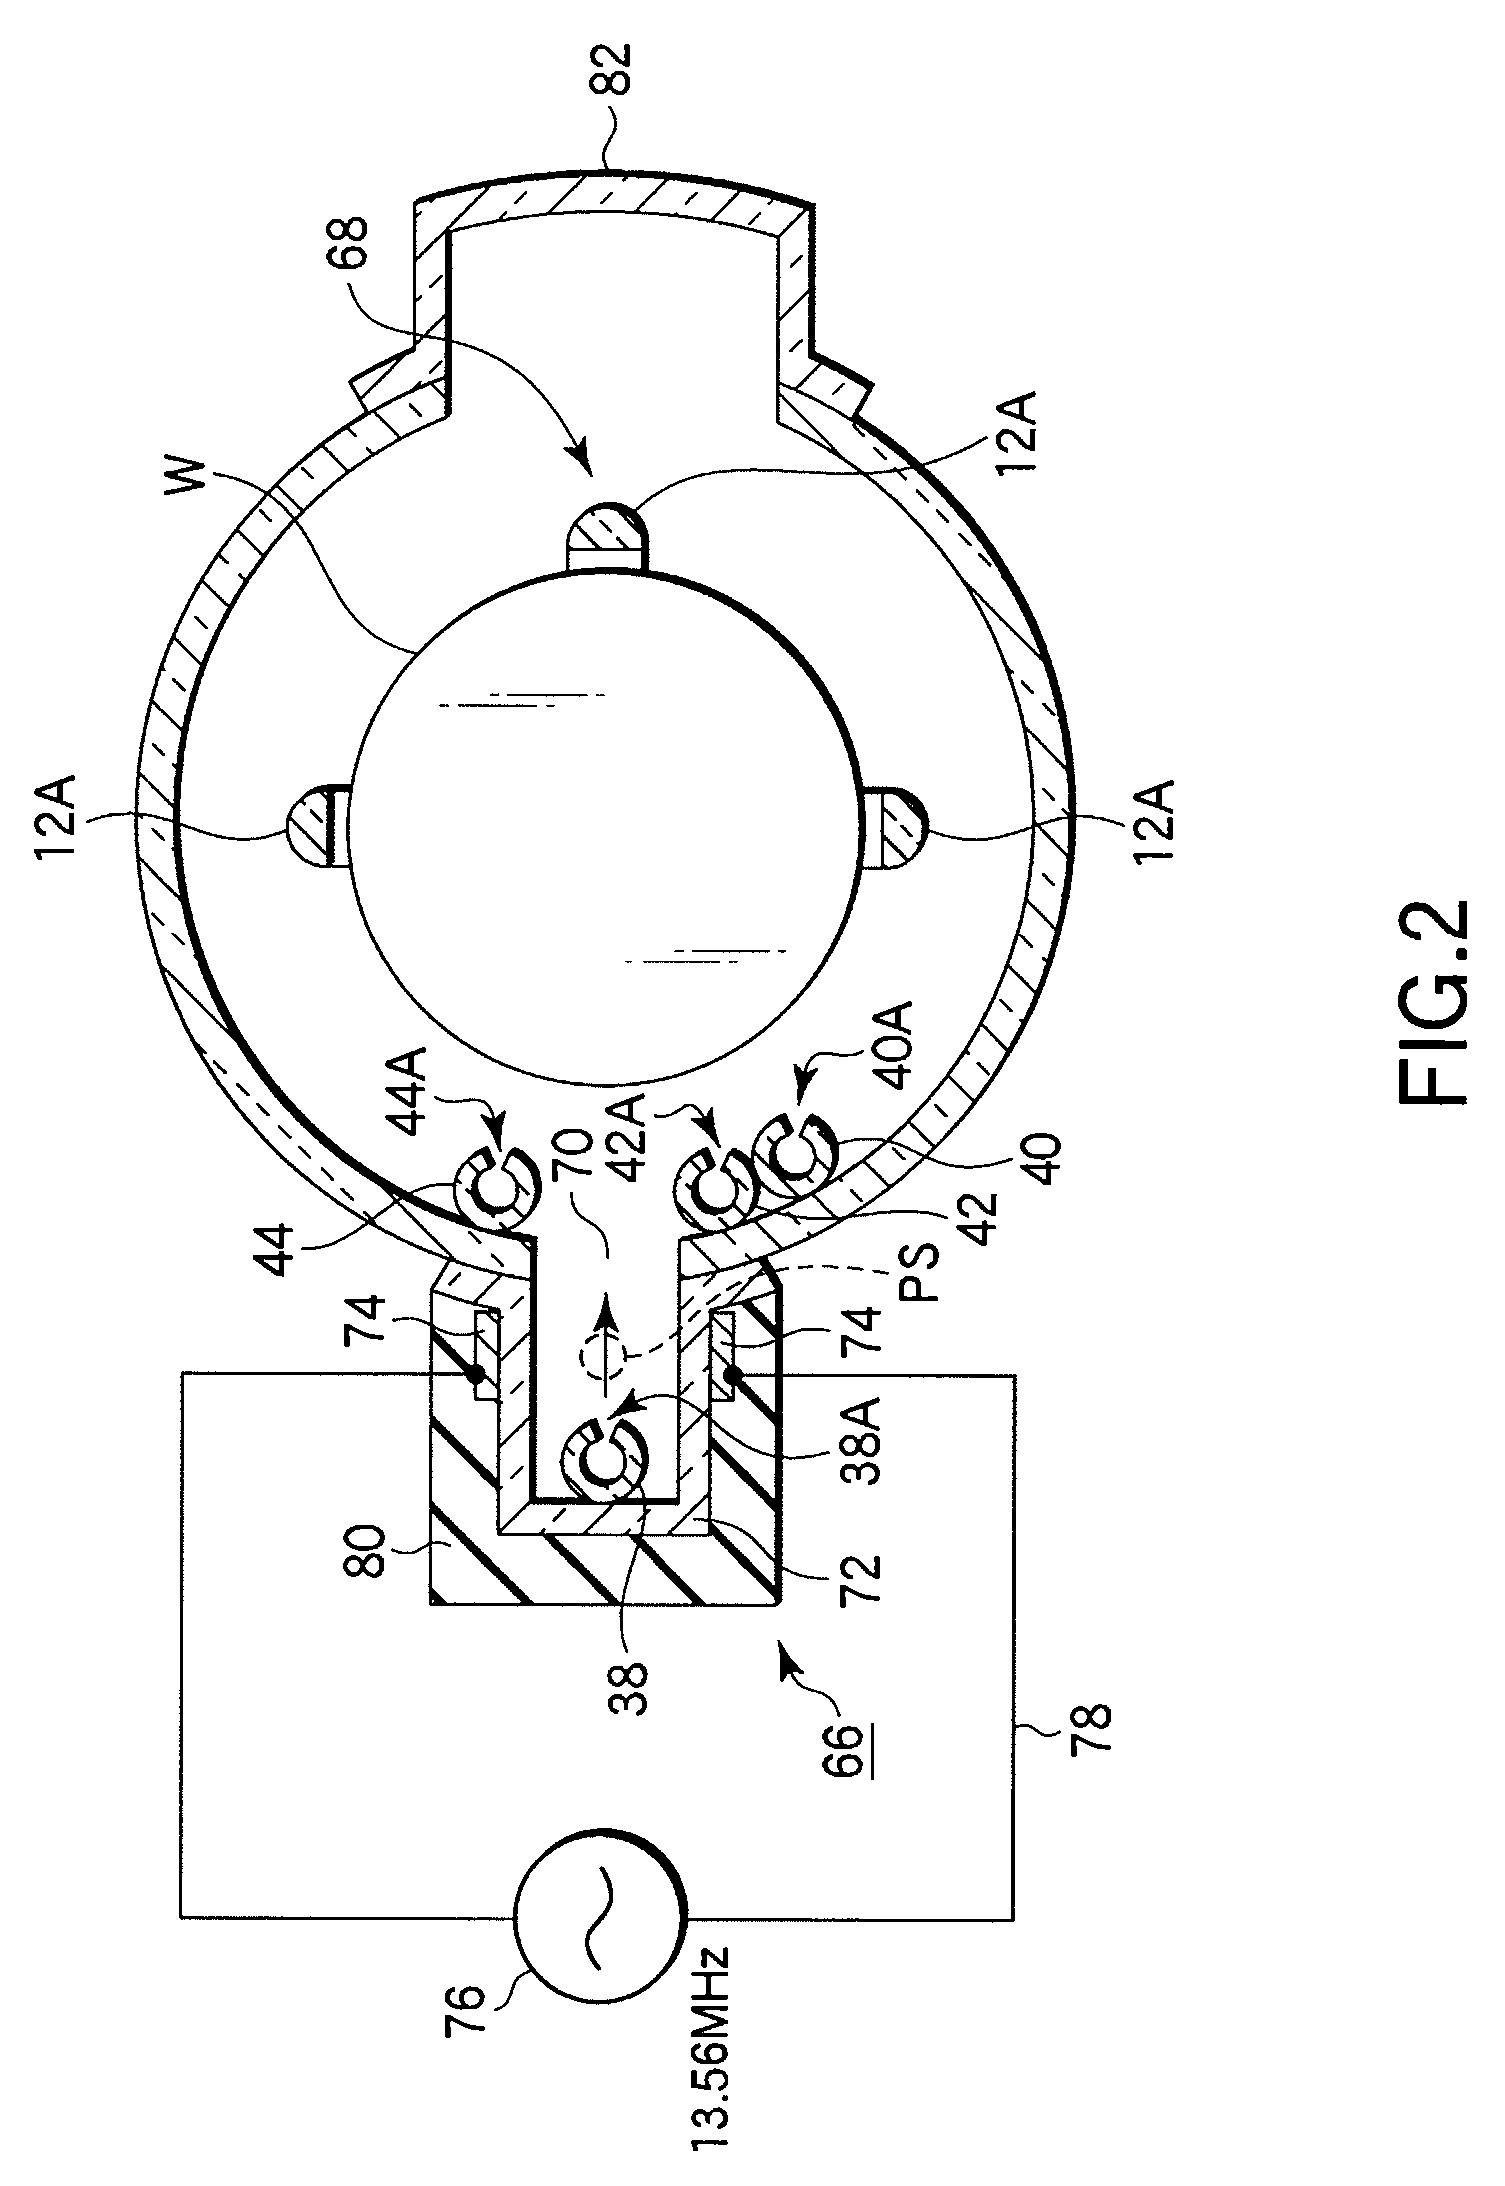 Film formation method and apparatus for forming silicon-containing insulating film doped with metal